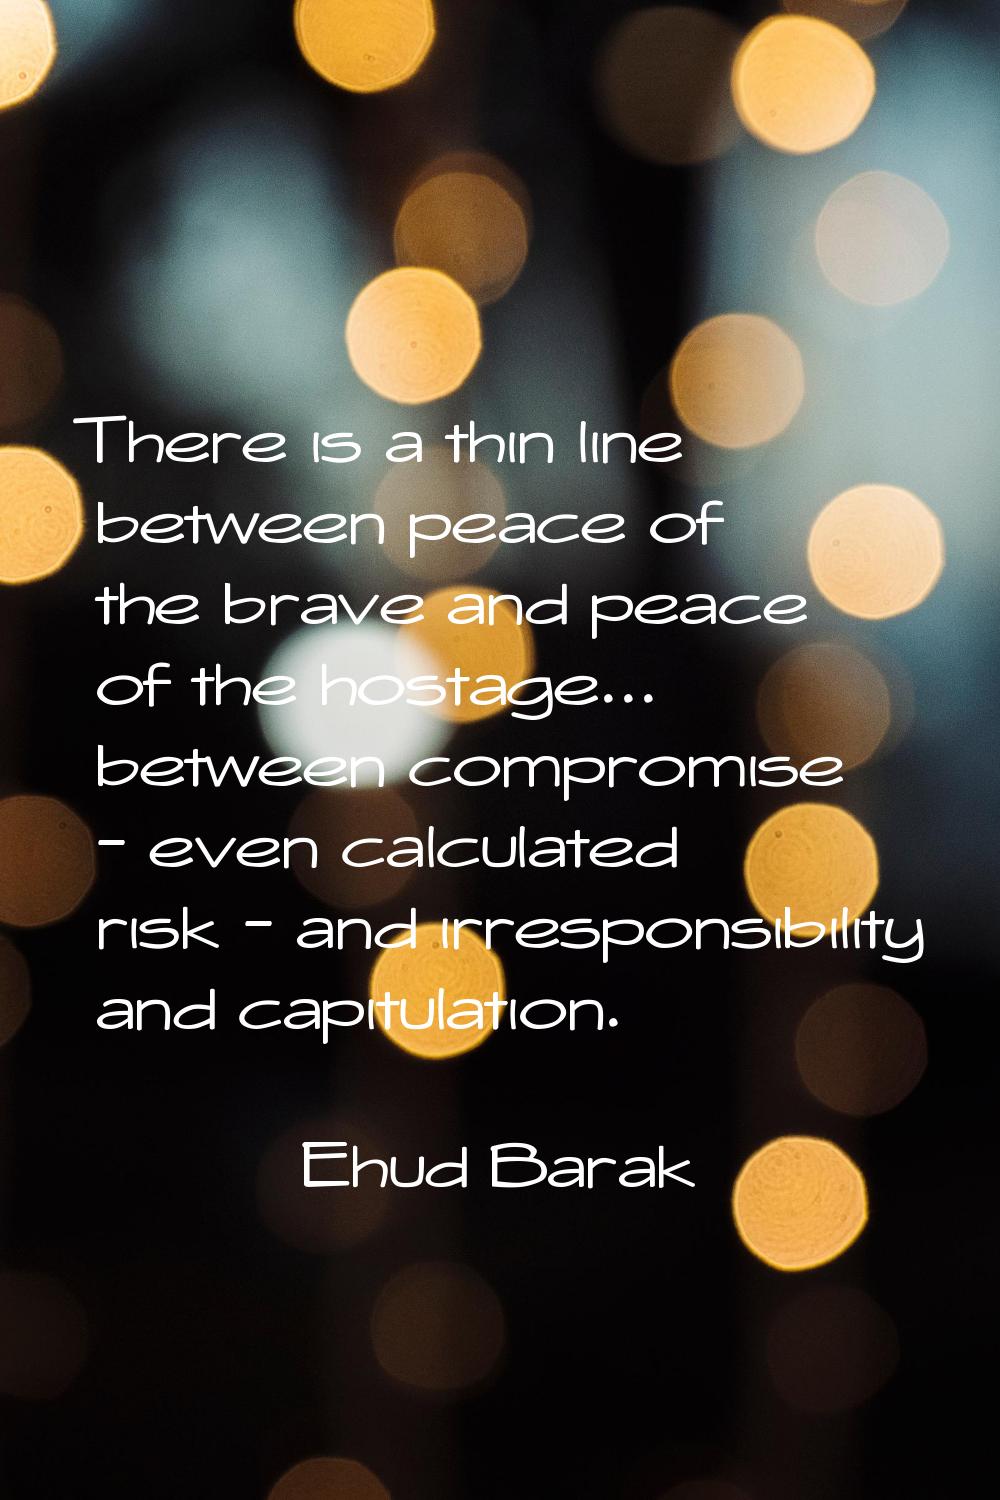 There is a thin line between peace of the brave and peace of the hostage... between compromise - ev